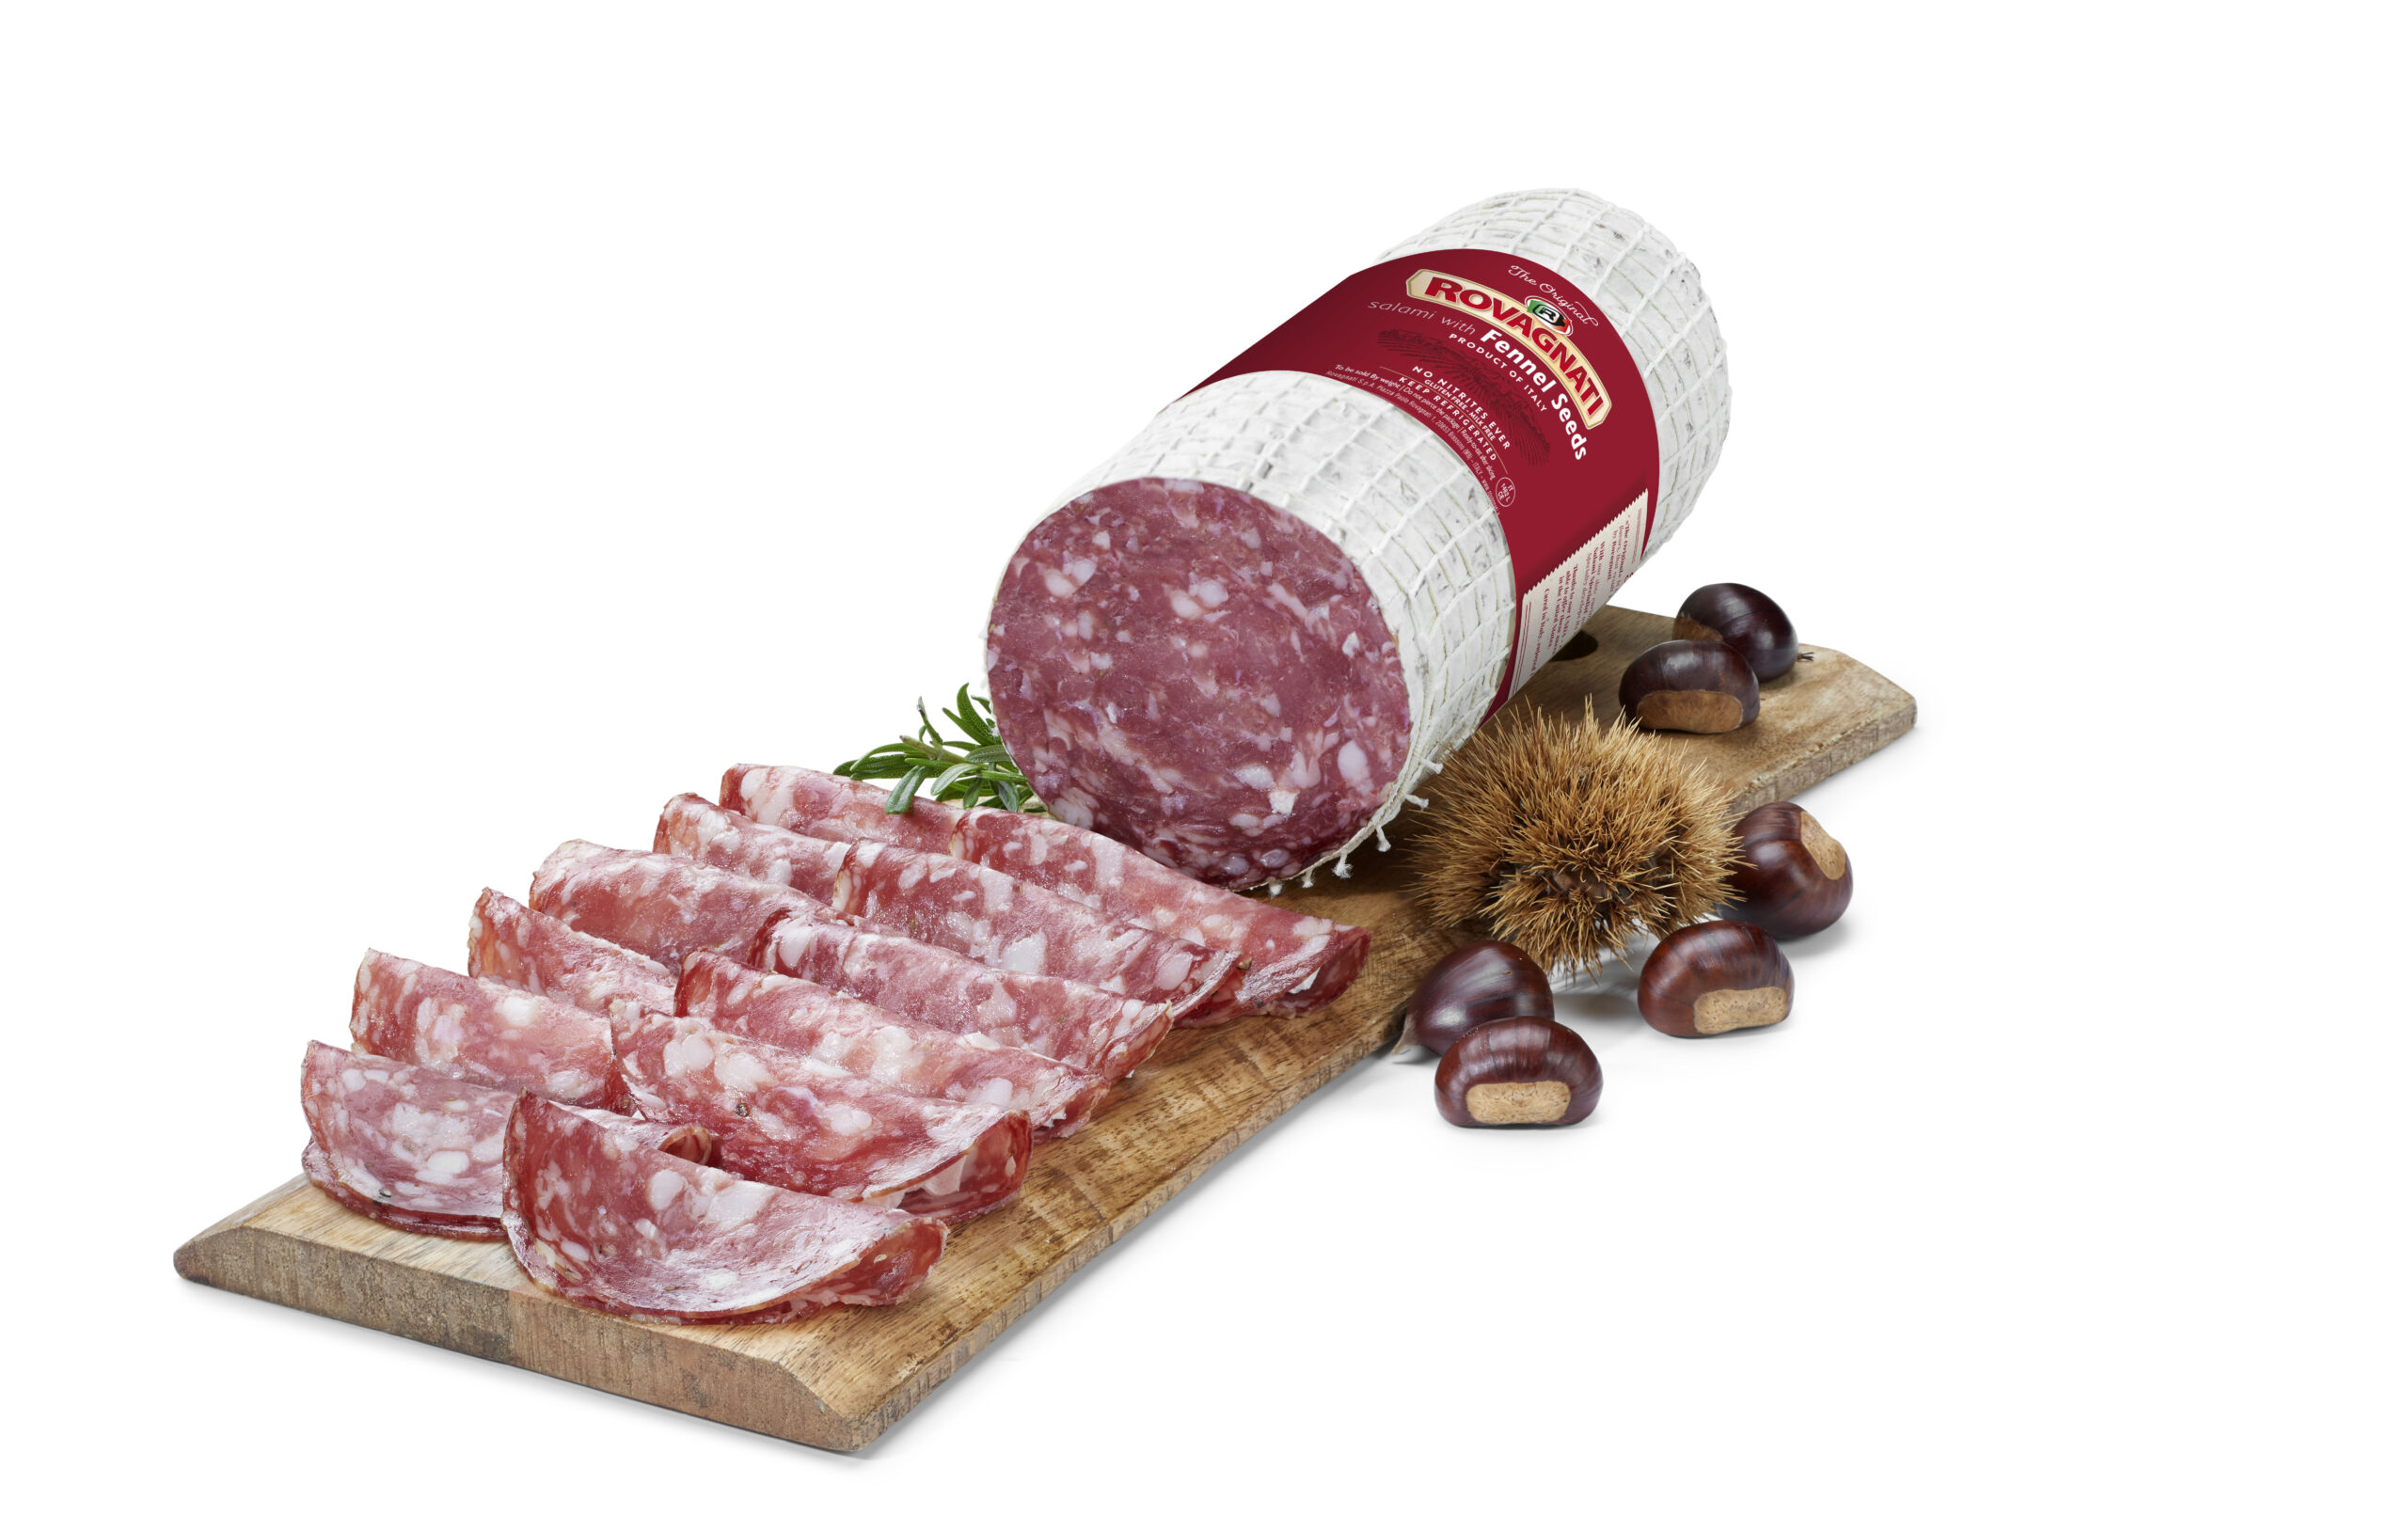 https://www.rovagnati.us/wp-content/uploads/2023/04/salame-with-fennel-seed-scaled-1.jpeg